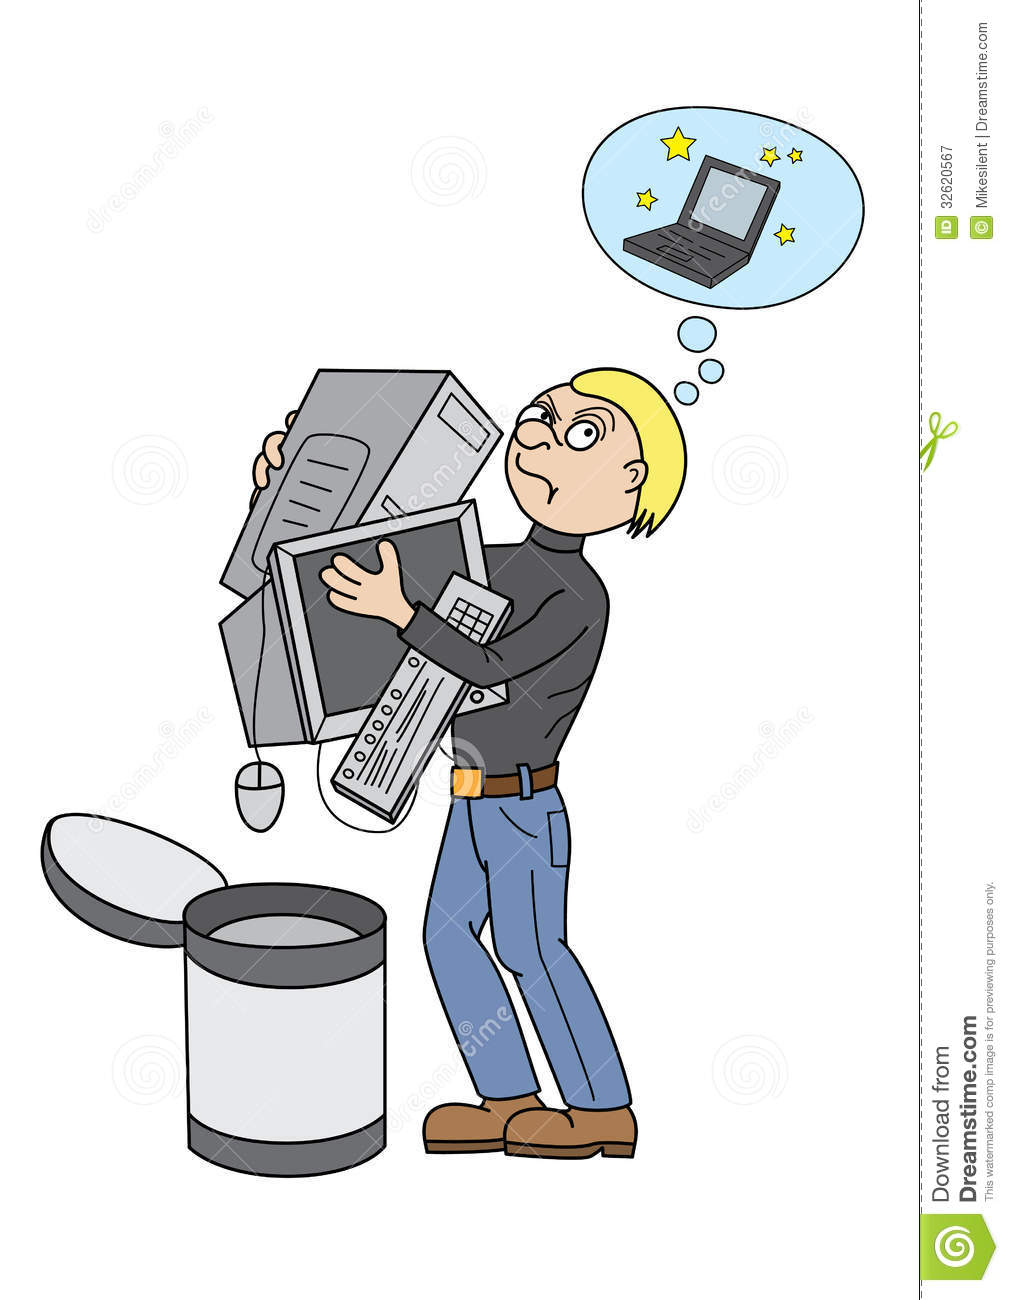 Cartoon Man Throwing Out Old Computer And Dreaming About A New Laptop    